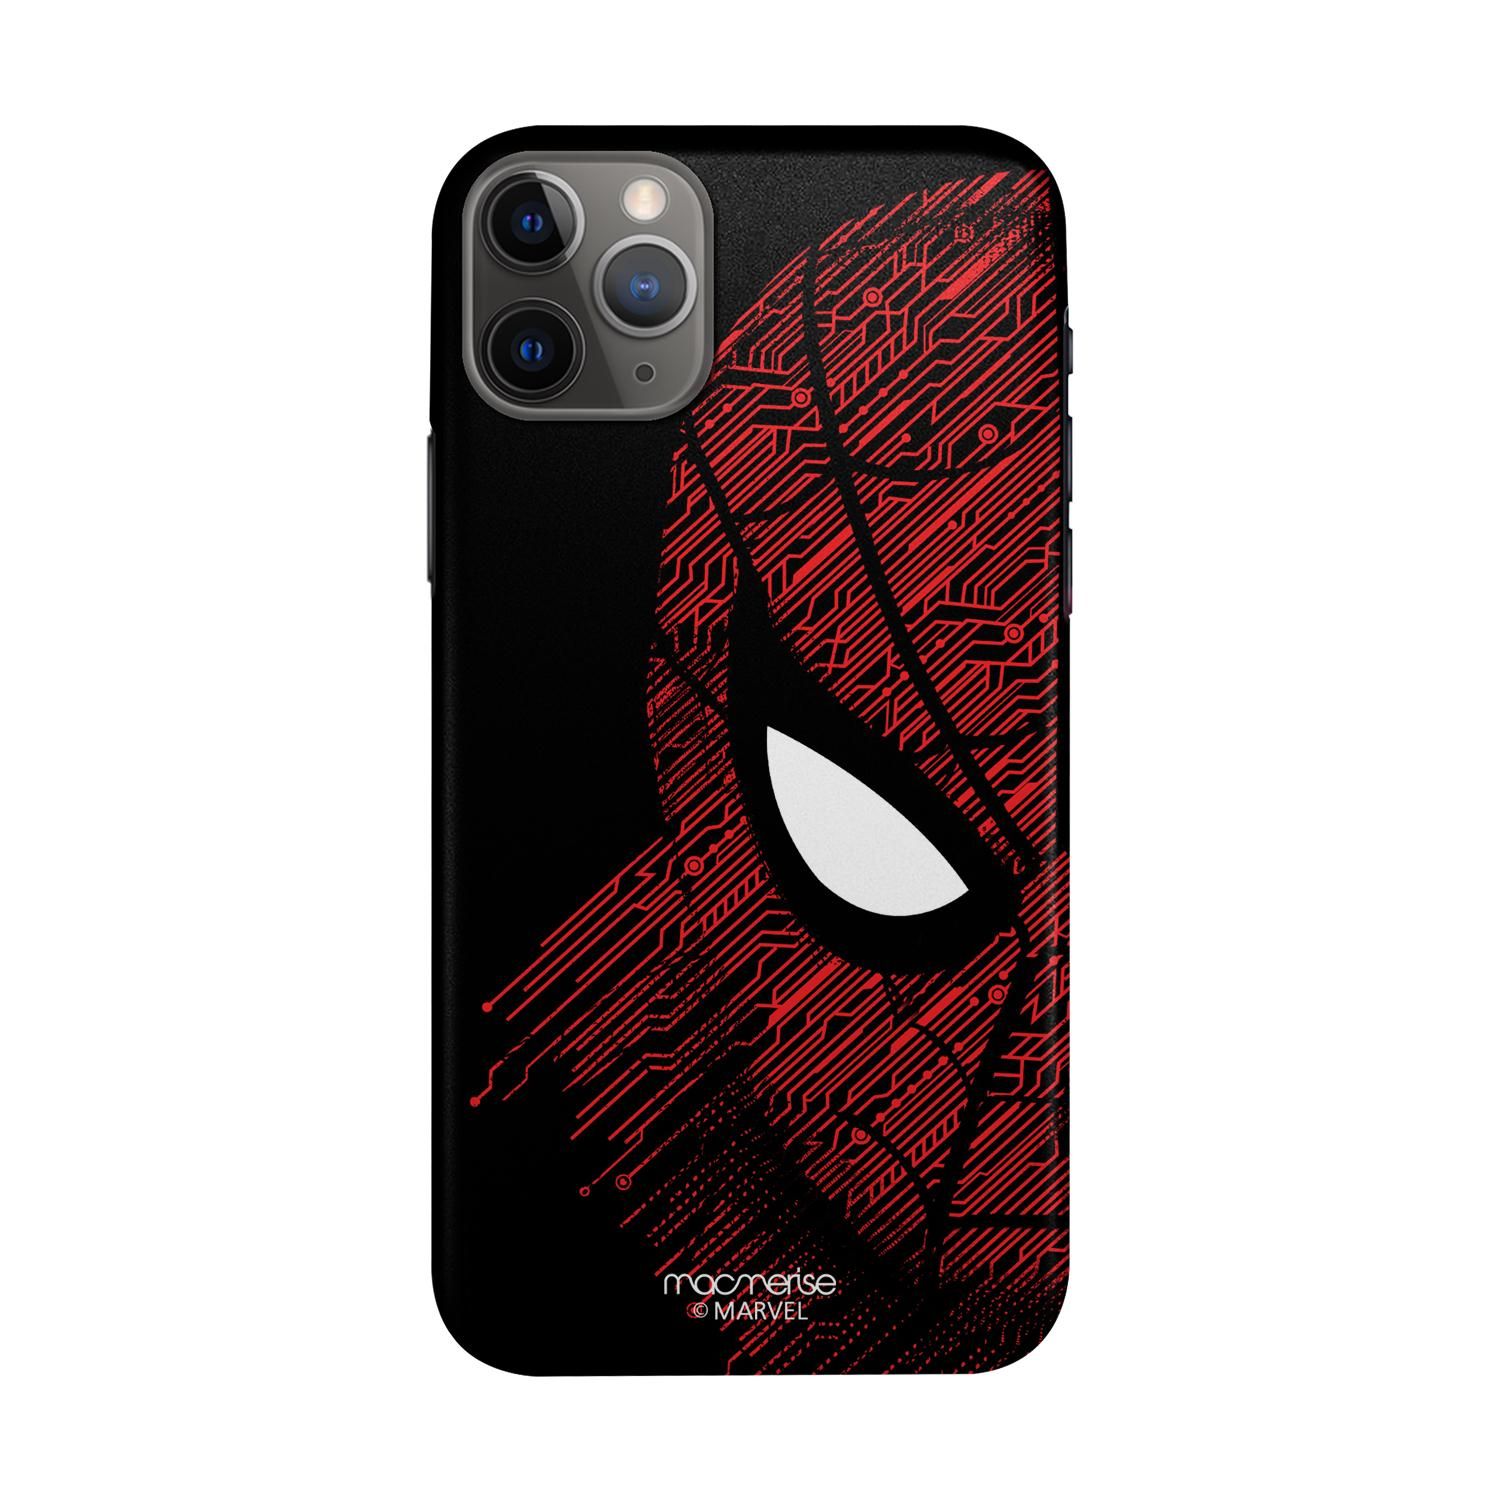 Buy Sketch Out Spiderman - Sleek Phone Case for iPhone 11 Pro Max Online